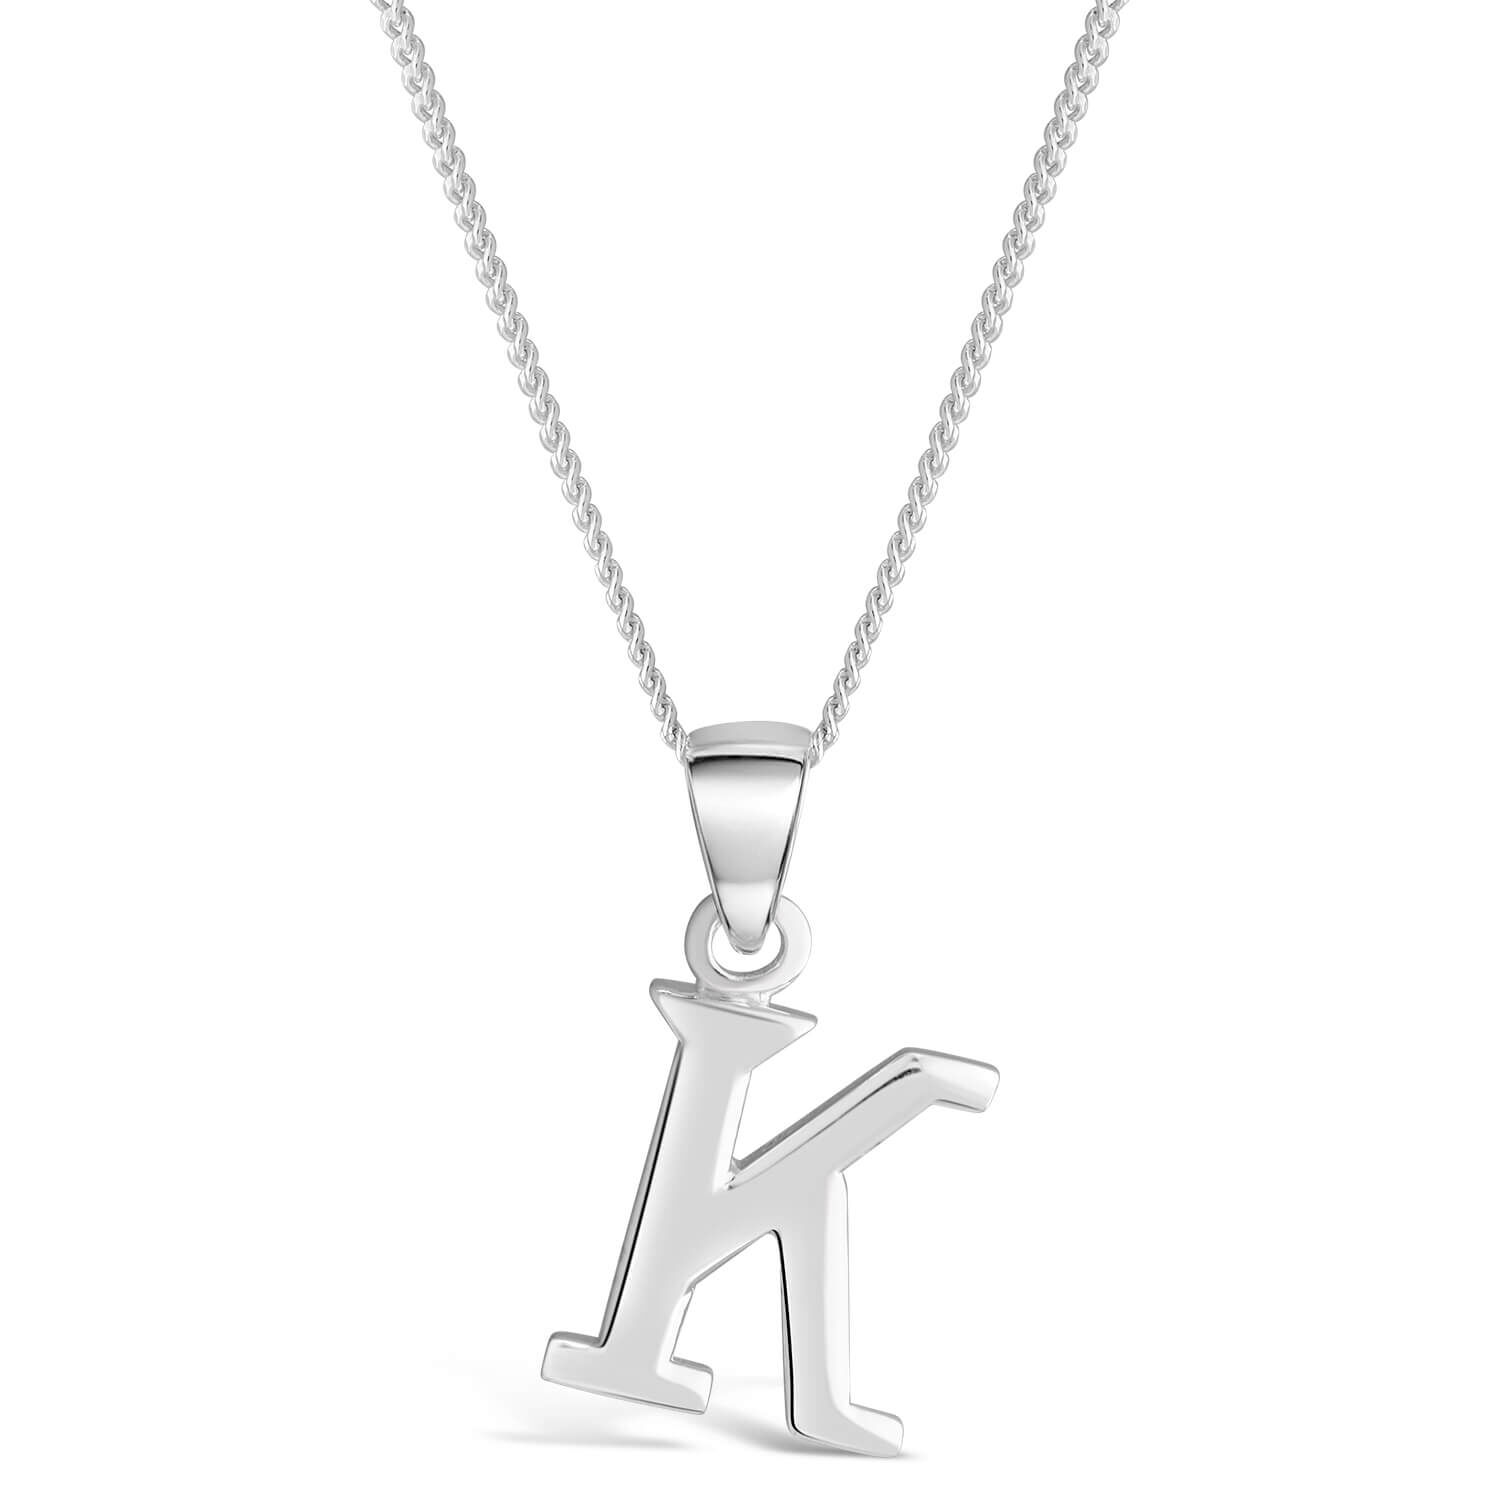 Necklace Pendant Letter K | Stainless Steel Party Jewelry | Letter K  Necklace Women - Necklace - Aliexpress